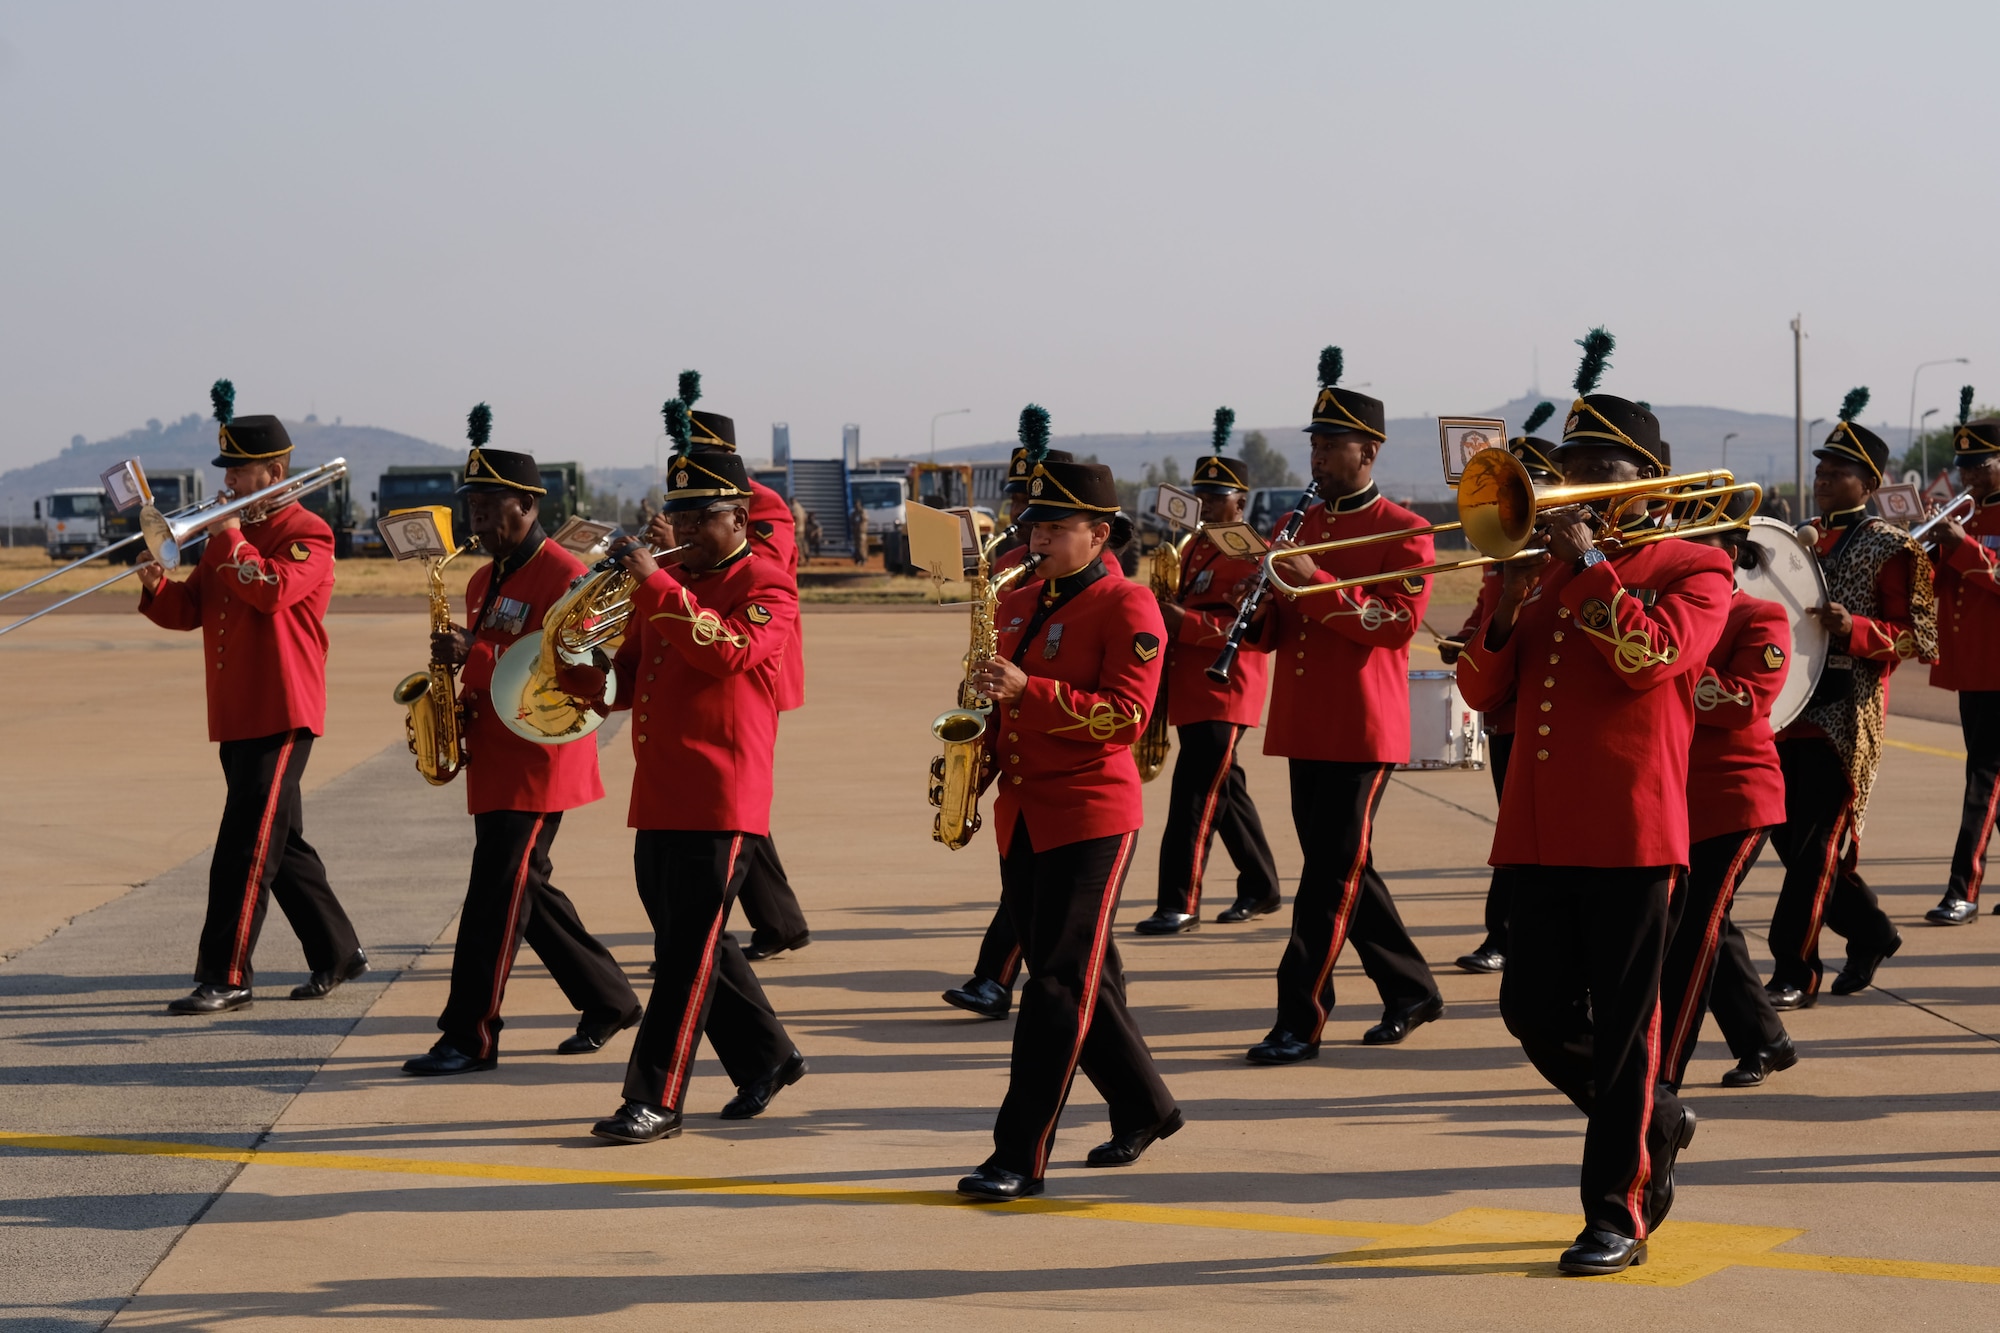 Members of the South African Army Band march during the African Aerospace and Defense Exhibition 18 opening ceremony, September 19, 2018, Waterkloof Air Force Base, South Africa.This tradeshow will increase our understanding of each other’s capabilities and proficiencies, enhancing our ability to operate together. (US Army photo by Staff Sgt. Jeffery Sandstrum)